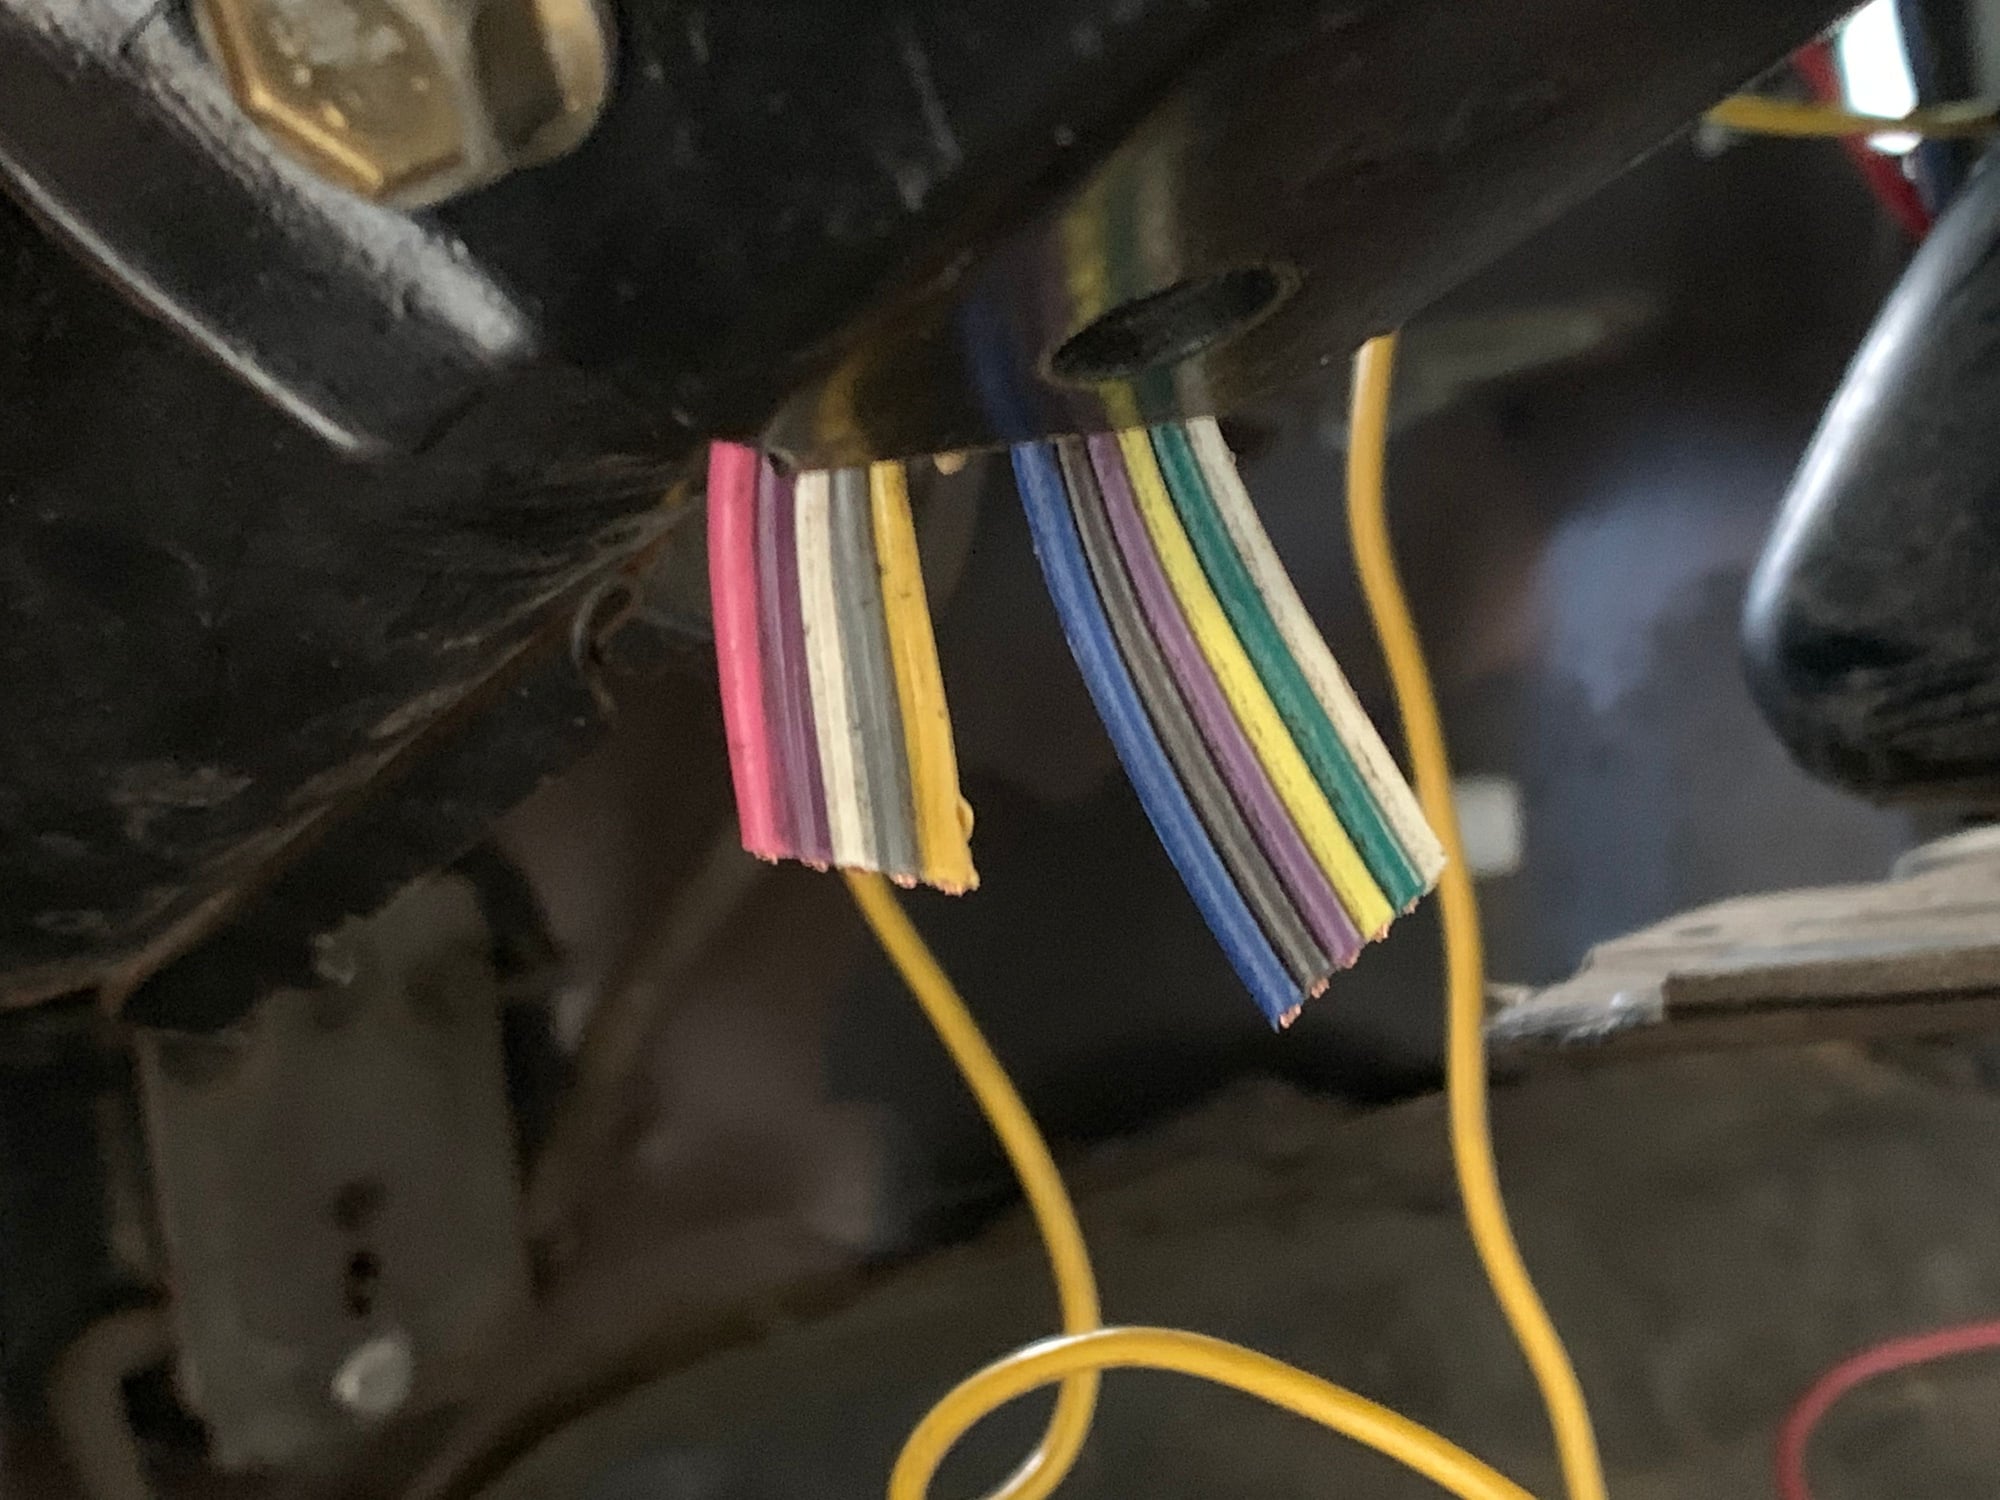 Wiring----Color Codes----- - Chevrolet Forum - Chevy Enthusiasts Forums  1997 Chevy Tahoe Ignition Switch Wireing Diagram Color Code    ChevroletForum